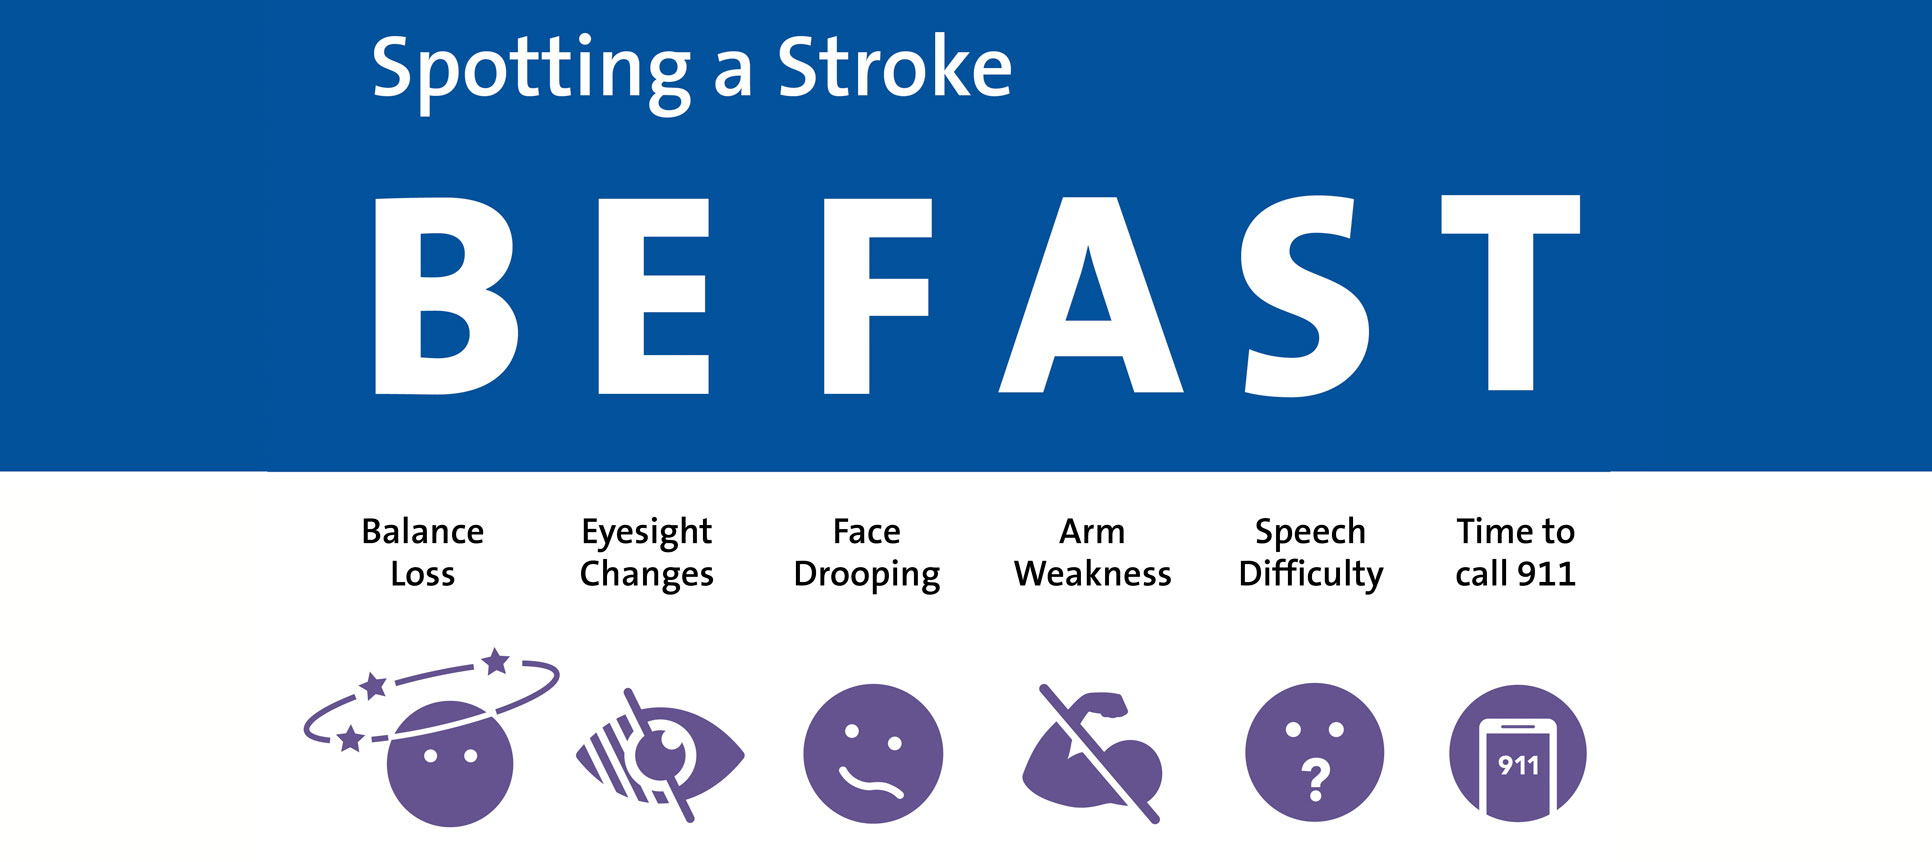 Know the Signs of Stroke - BE FAST | Duke Health